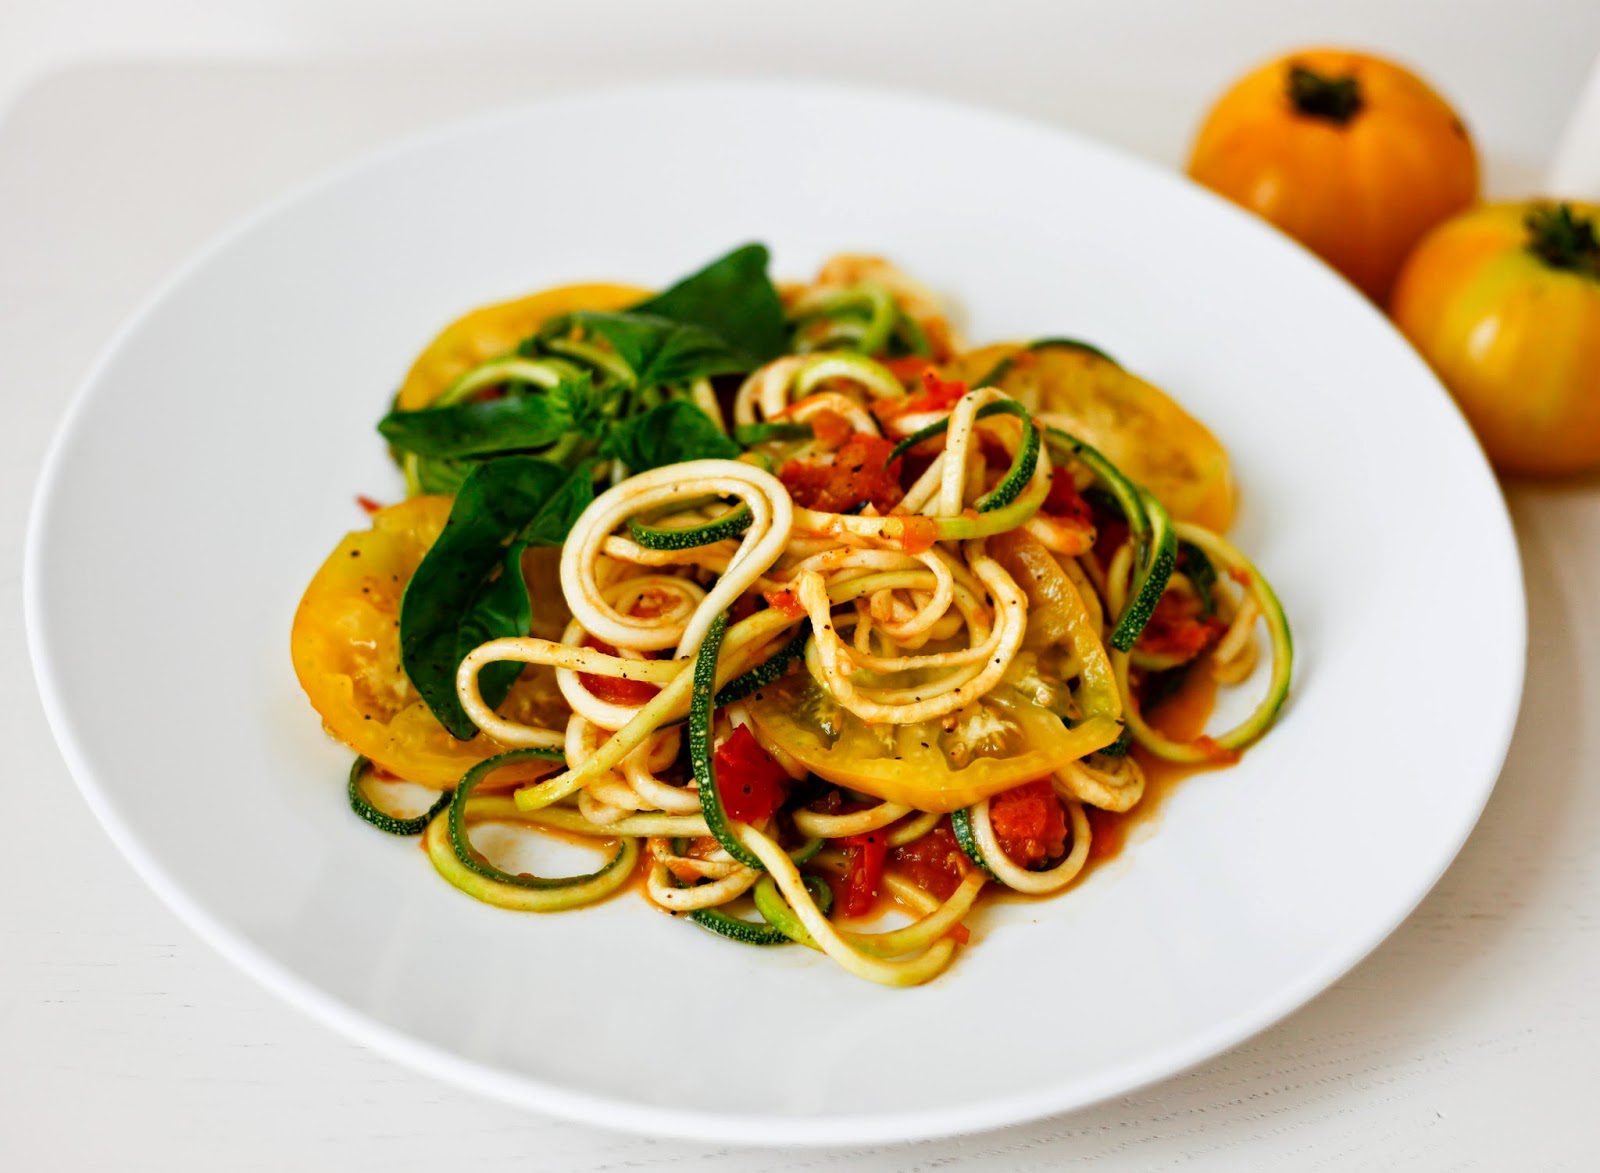 Simple Zucchini Noodles (Zoodles) with Tomato Sauce